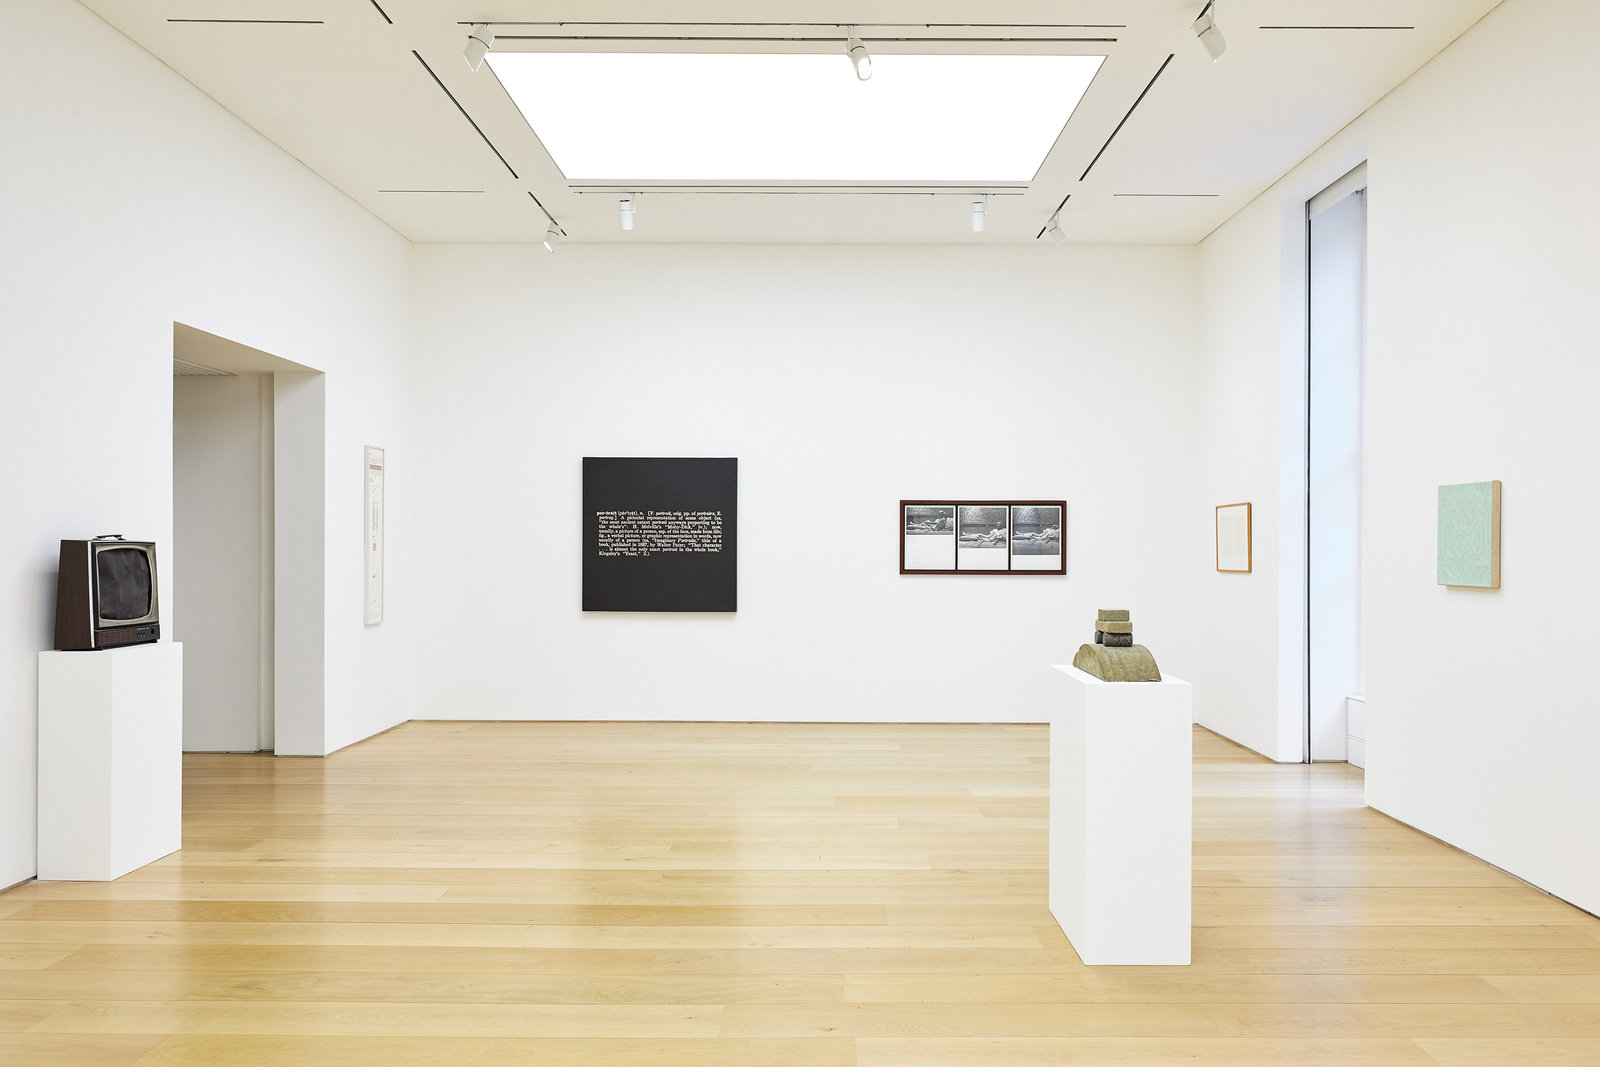 An installation view of works hung on the wall and sculptures on pedestals. 